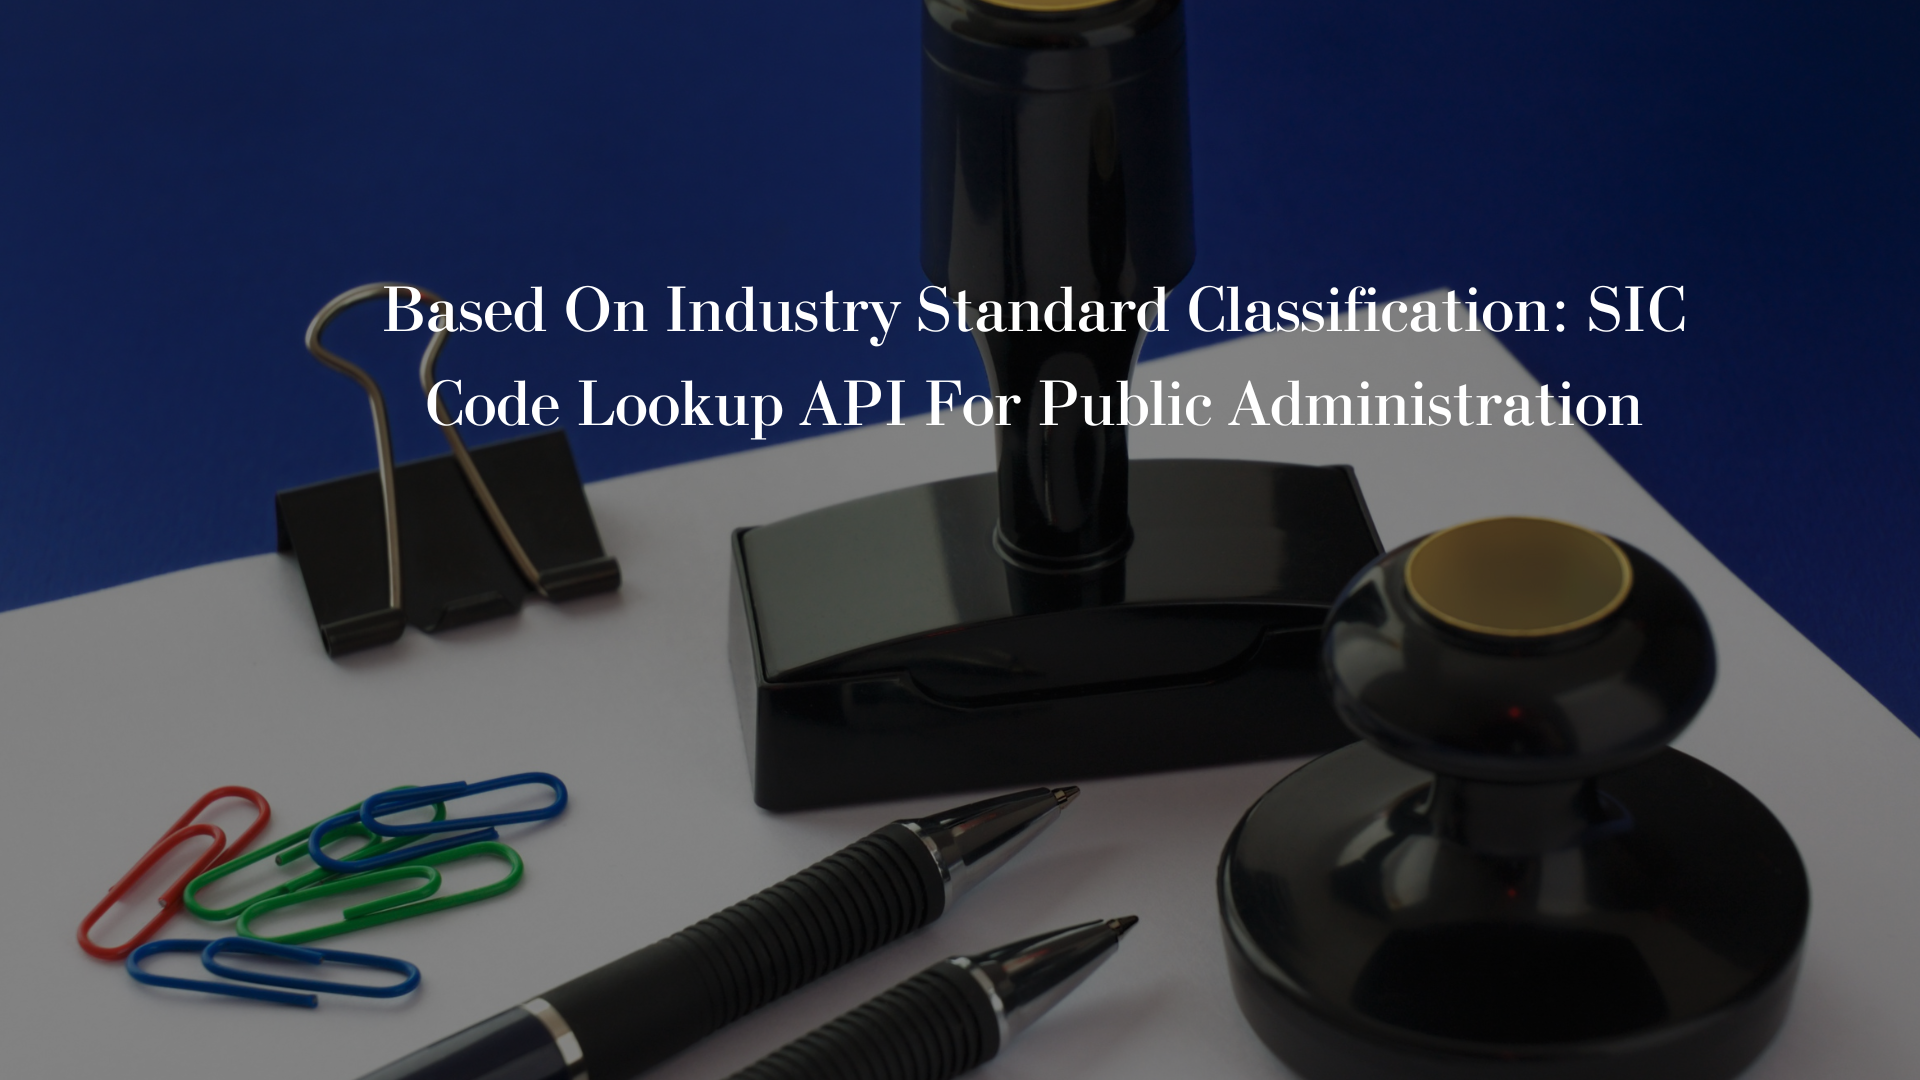 Based On Industry Standard Classification: SIC Code Lookup API For Public Administration